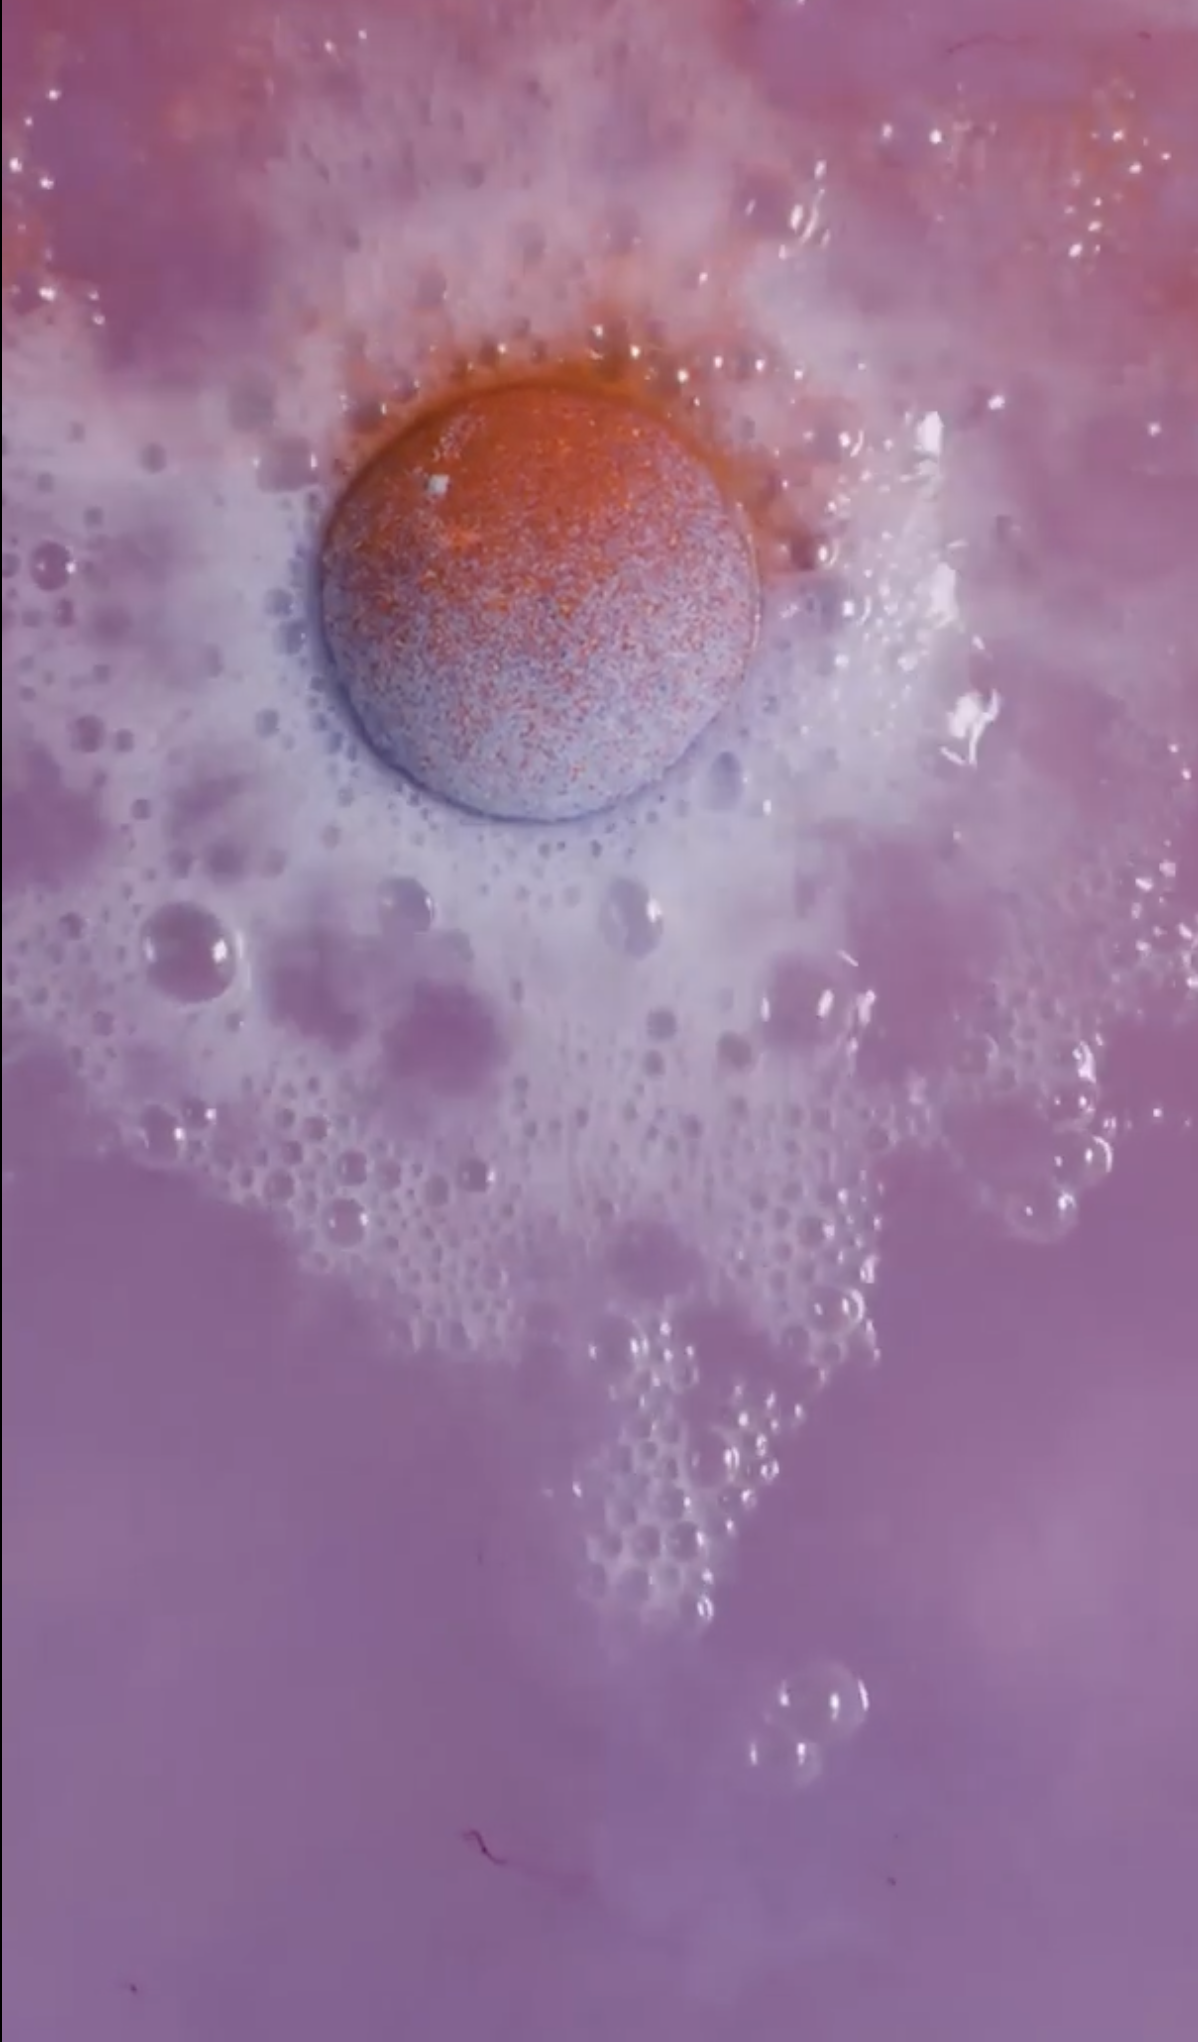 The Space Girl bath bomb is dissolving in the watering giving off energetic, foaming bubbles of deep purples with stunning flecks of red.